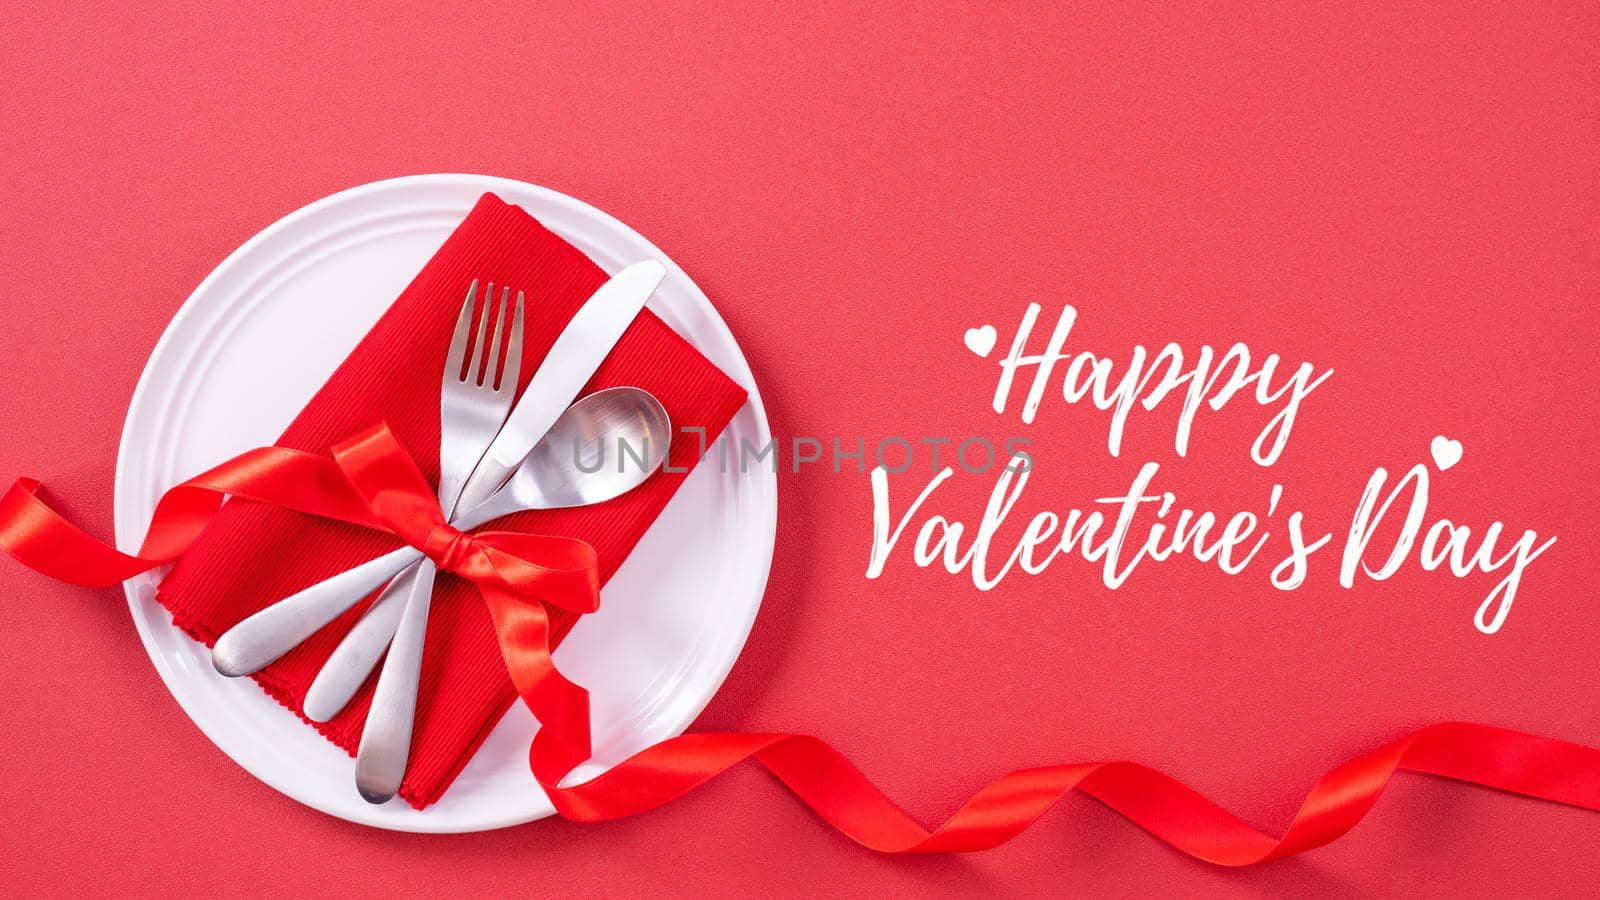 Valentine's Day holiday dating meal, banquet greeting card design concept - White plate with cutlery on red background, top view, flat lay. by ROMIXIMAGE